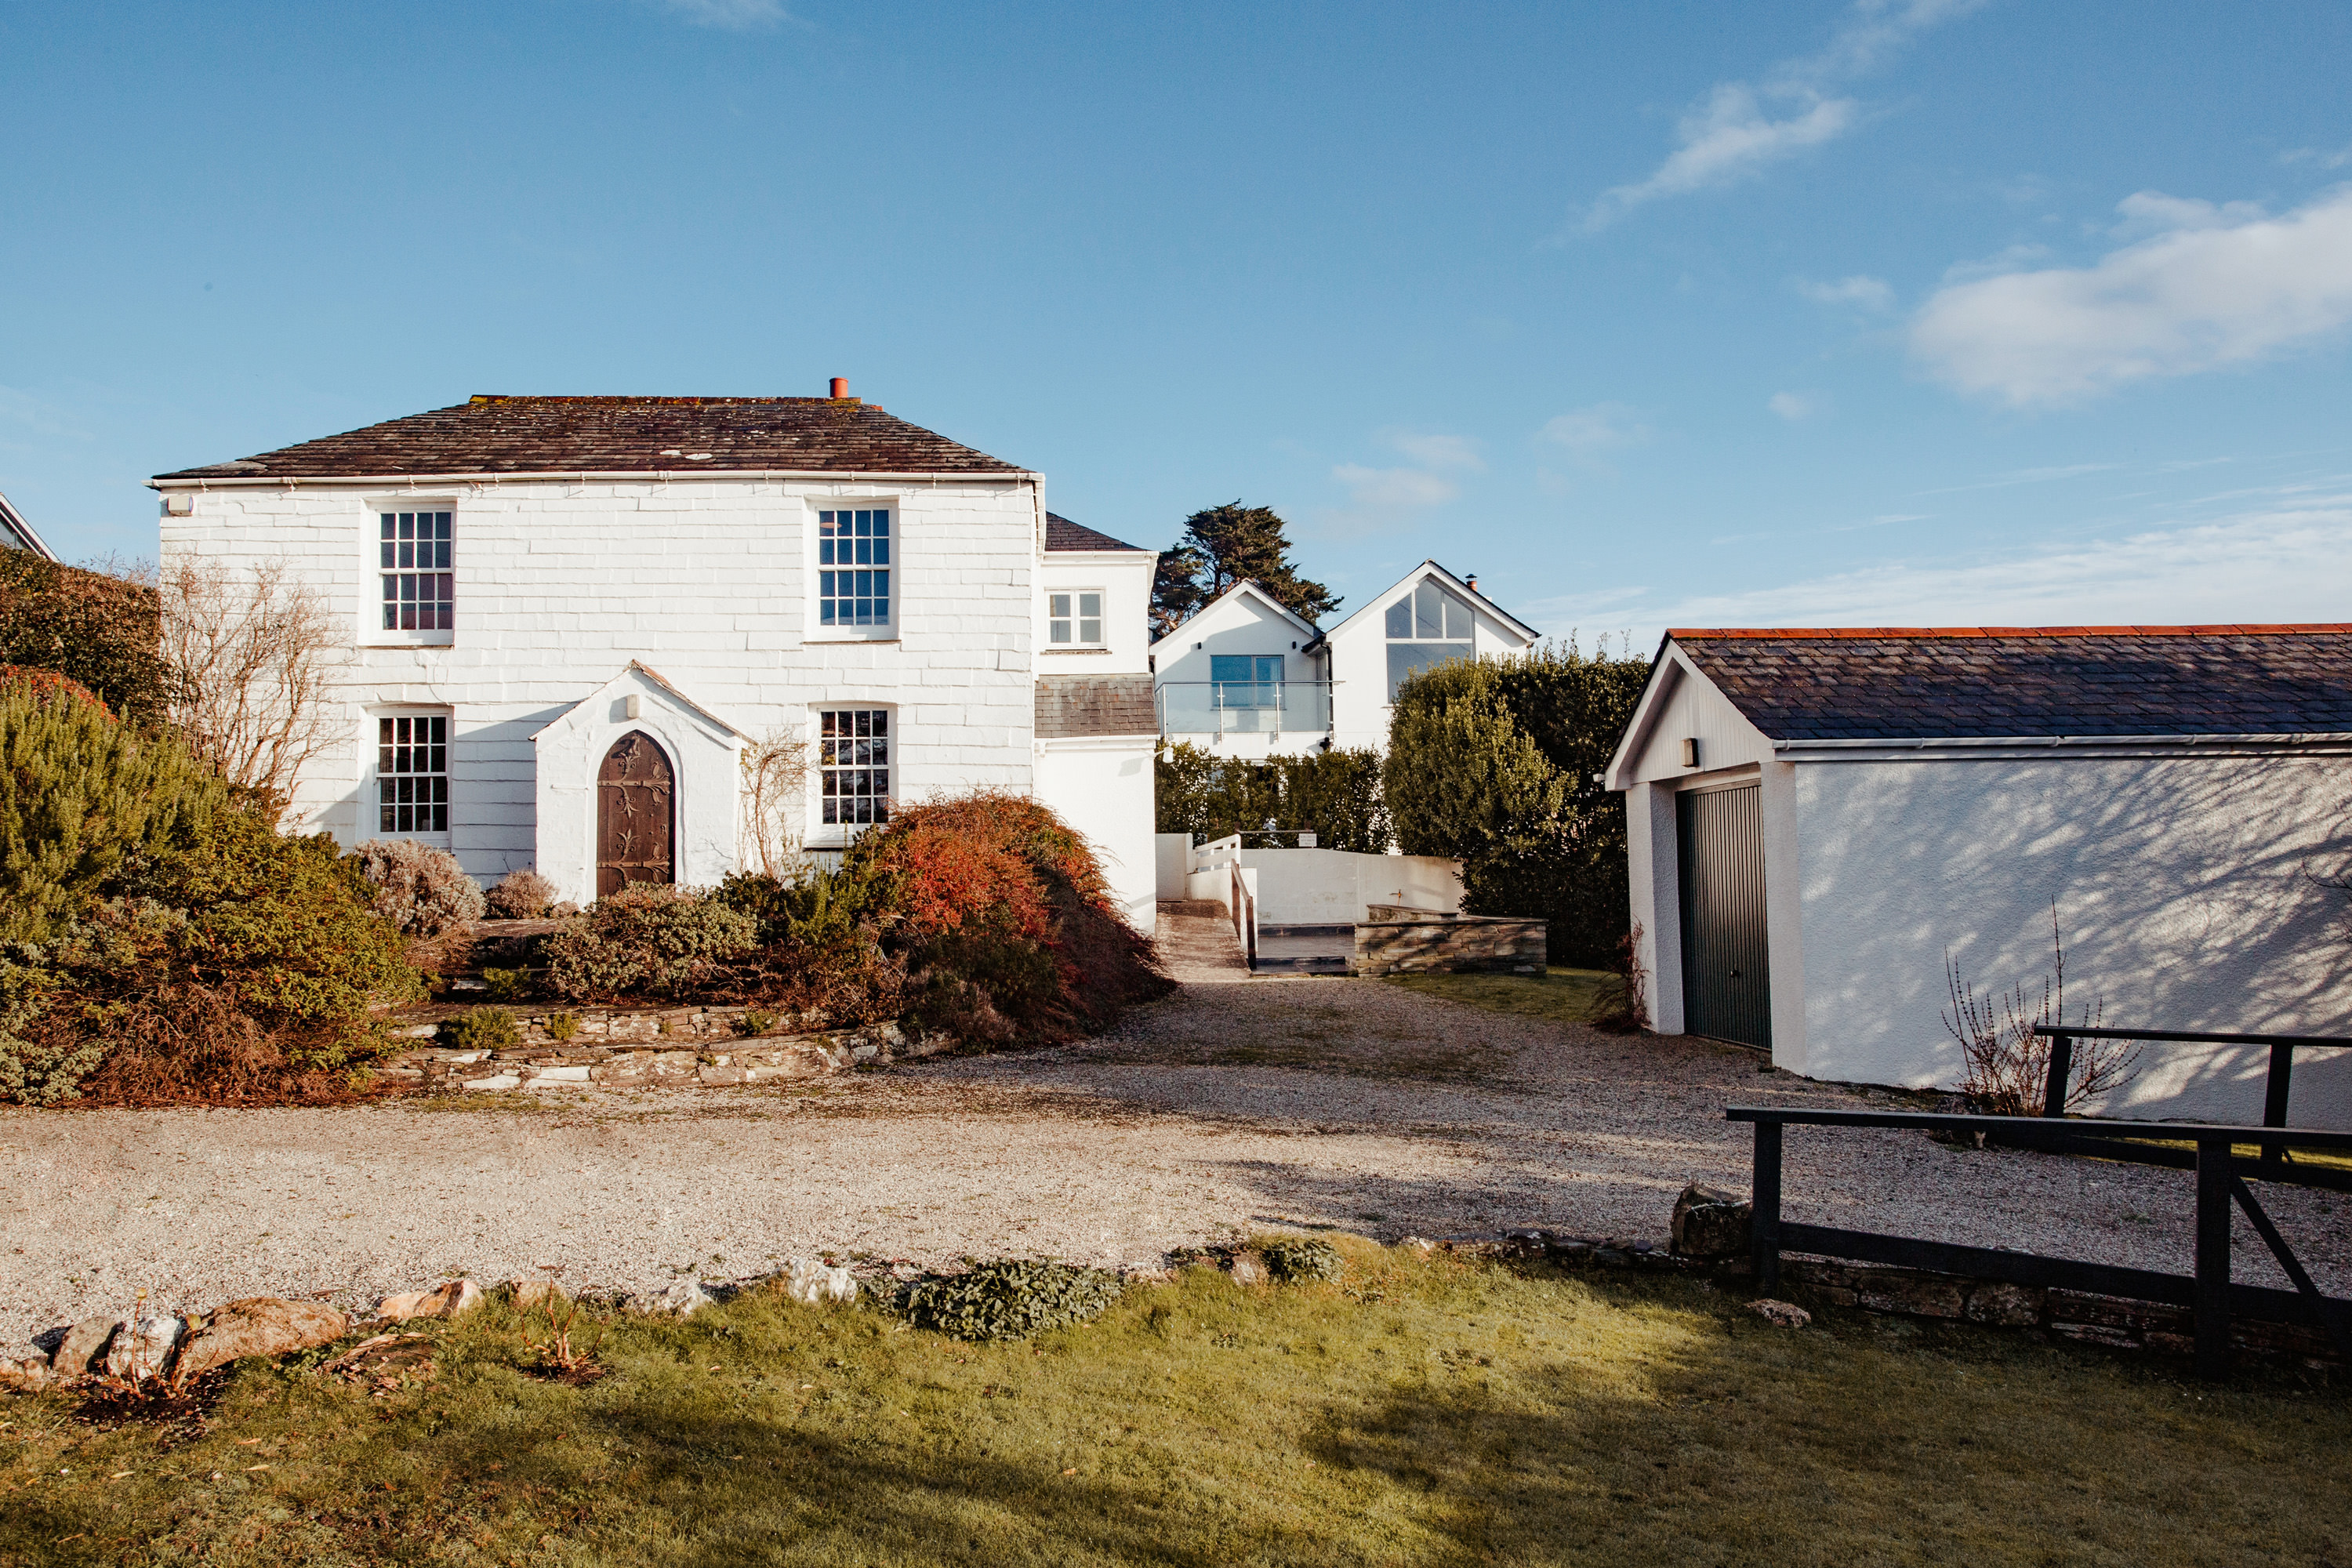 Lower Farm, a self-catering holiday home in Daymer Bay, North Cornwall